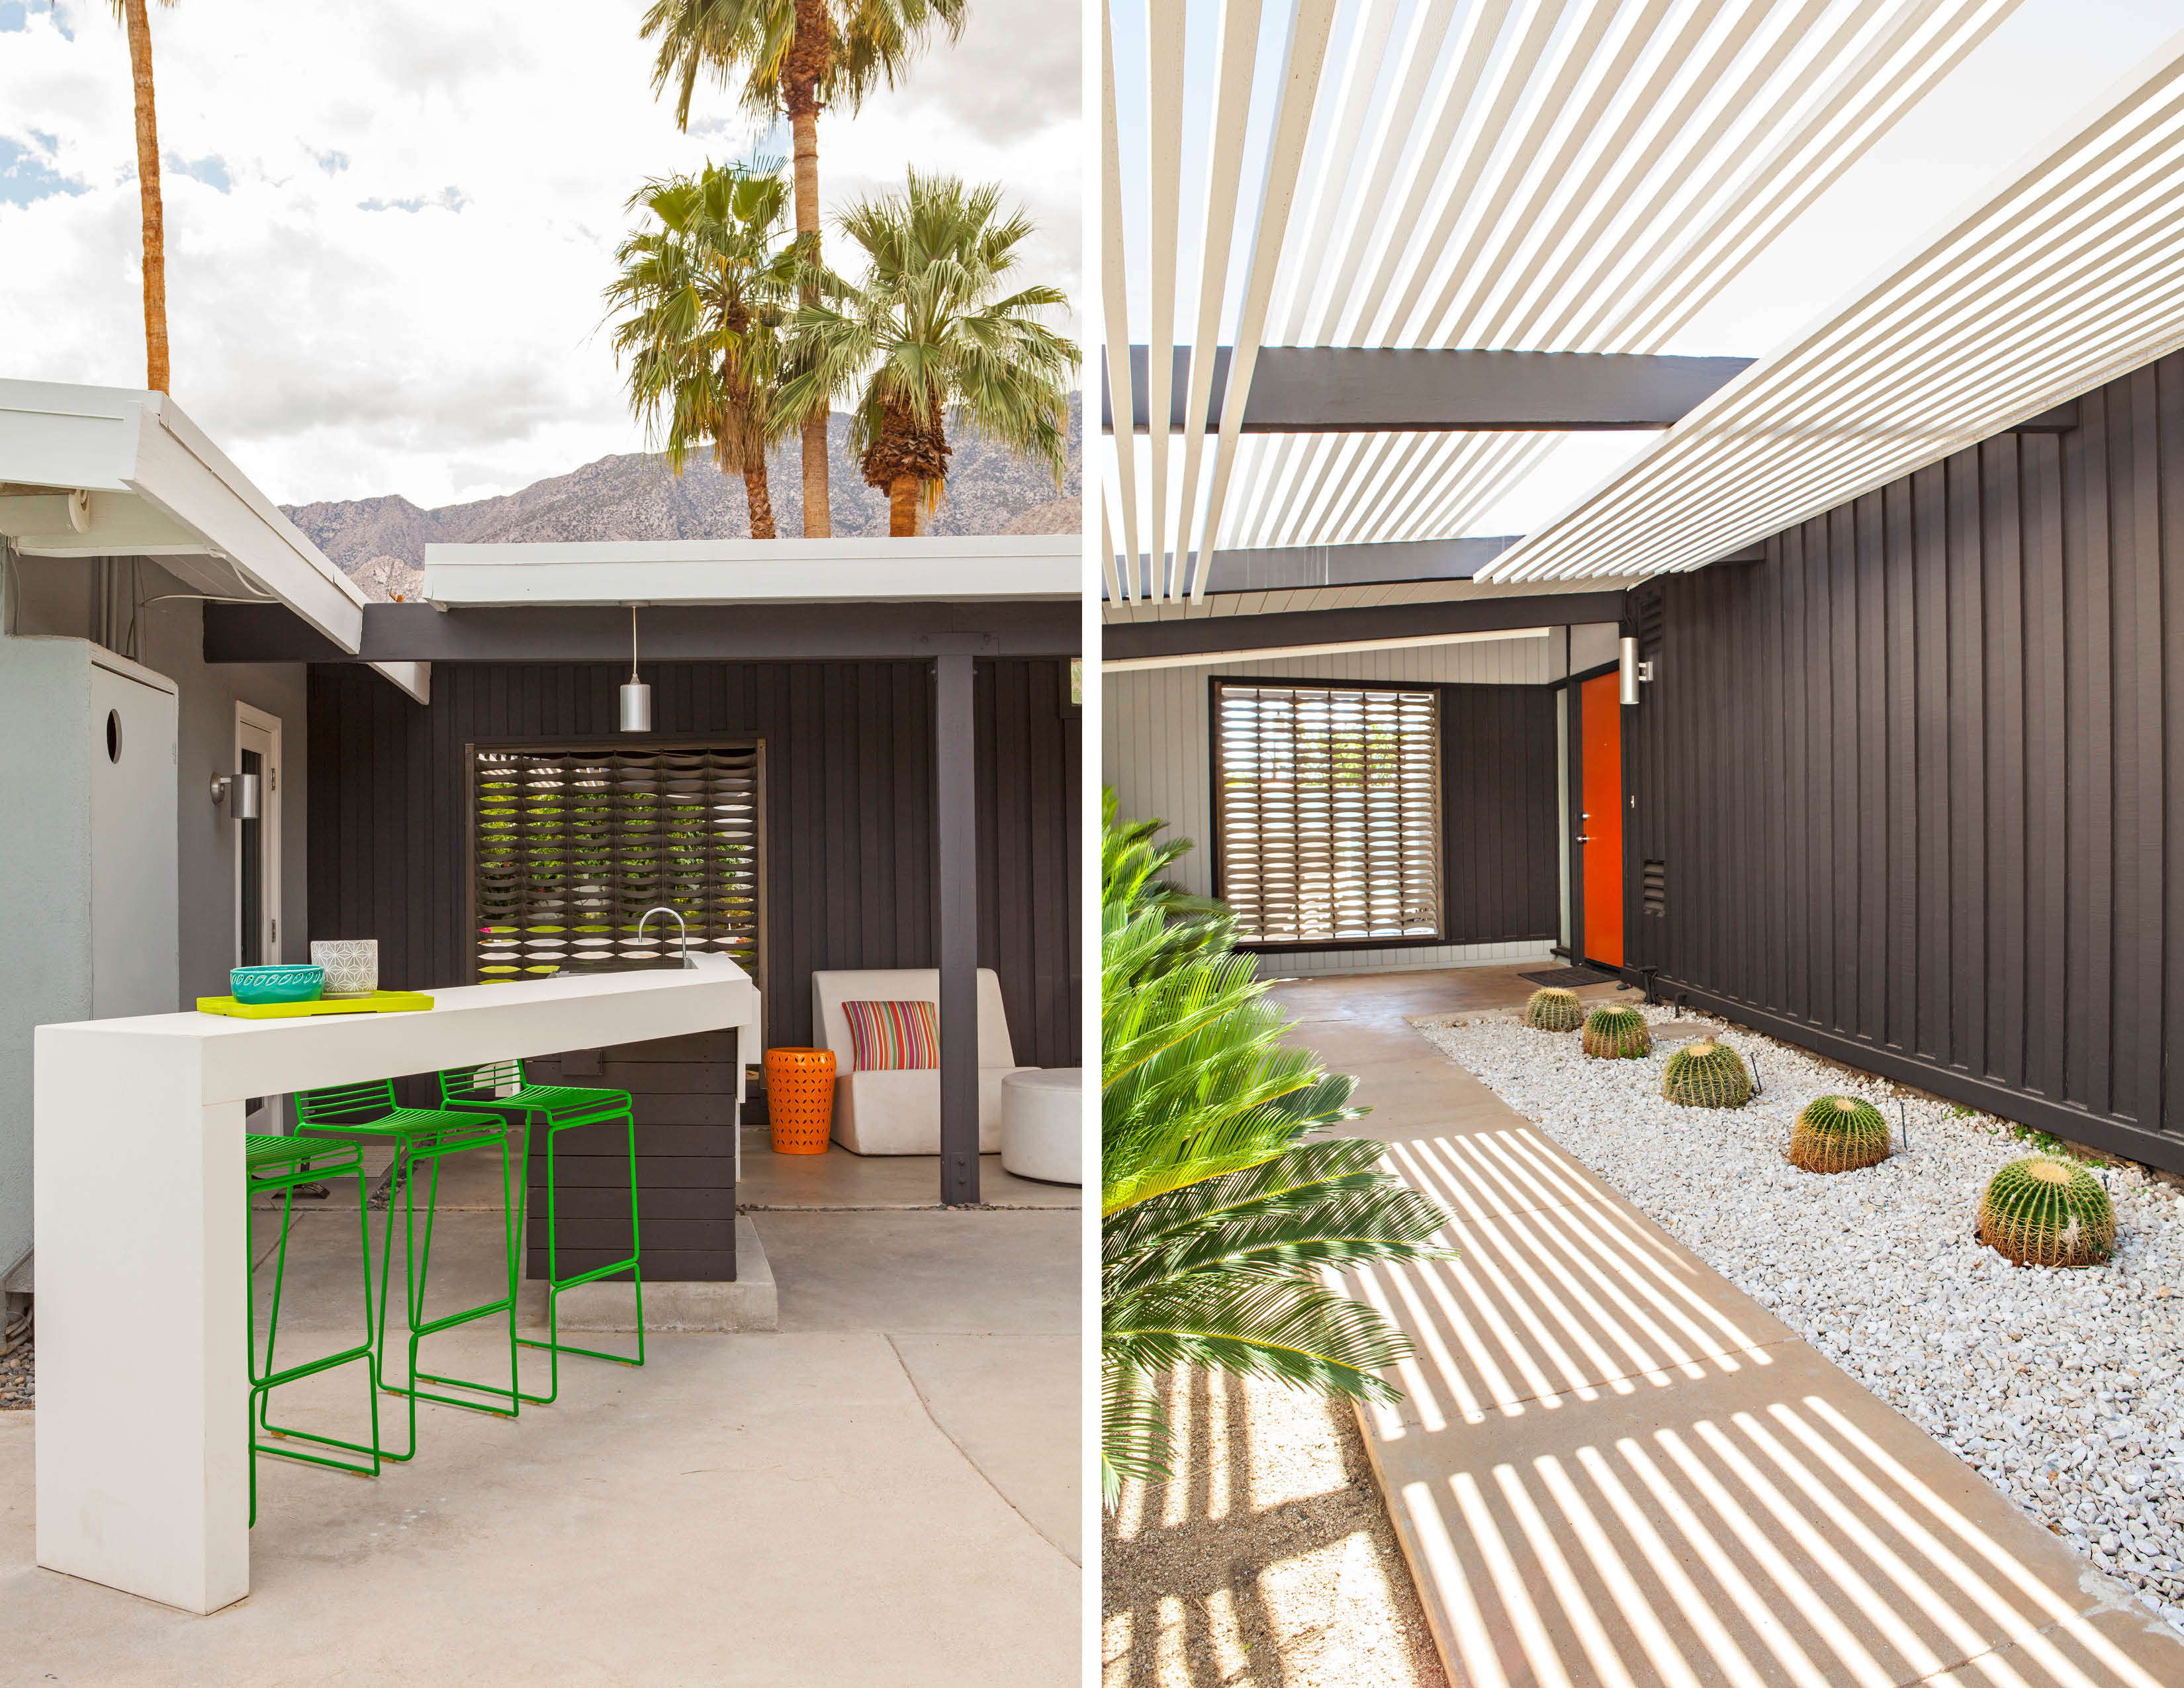 Unit 7 Architecture | Projects - Palm Springs Residence